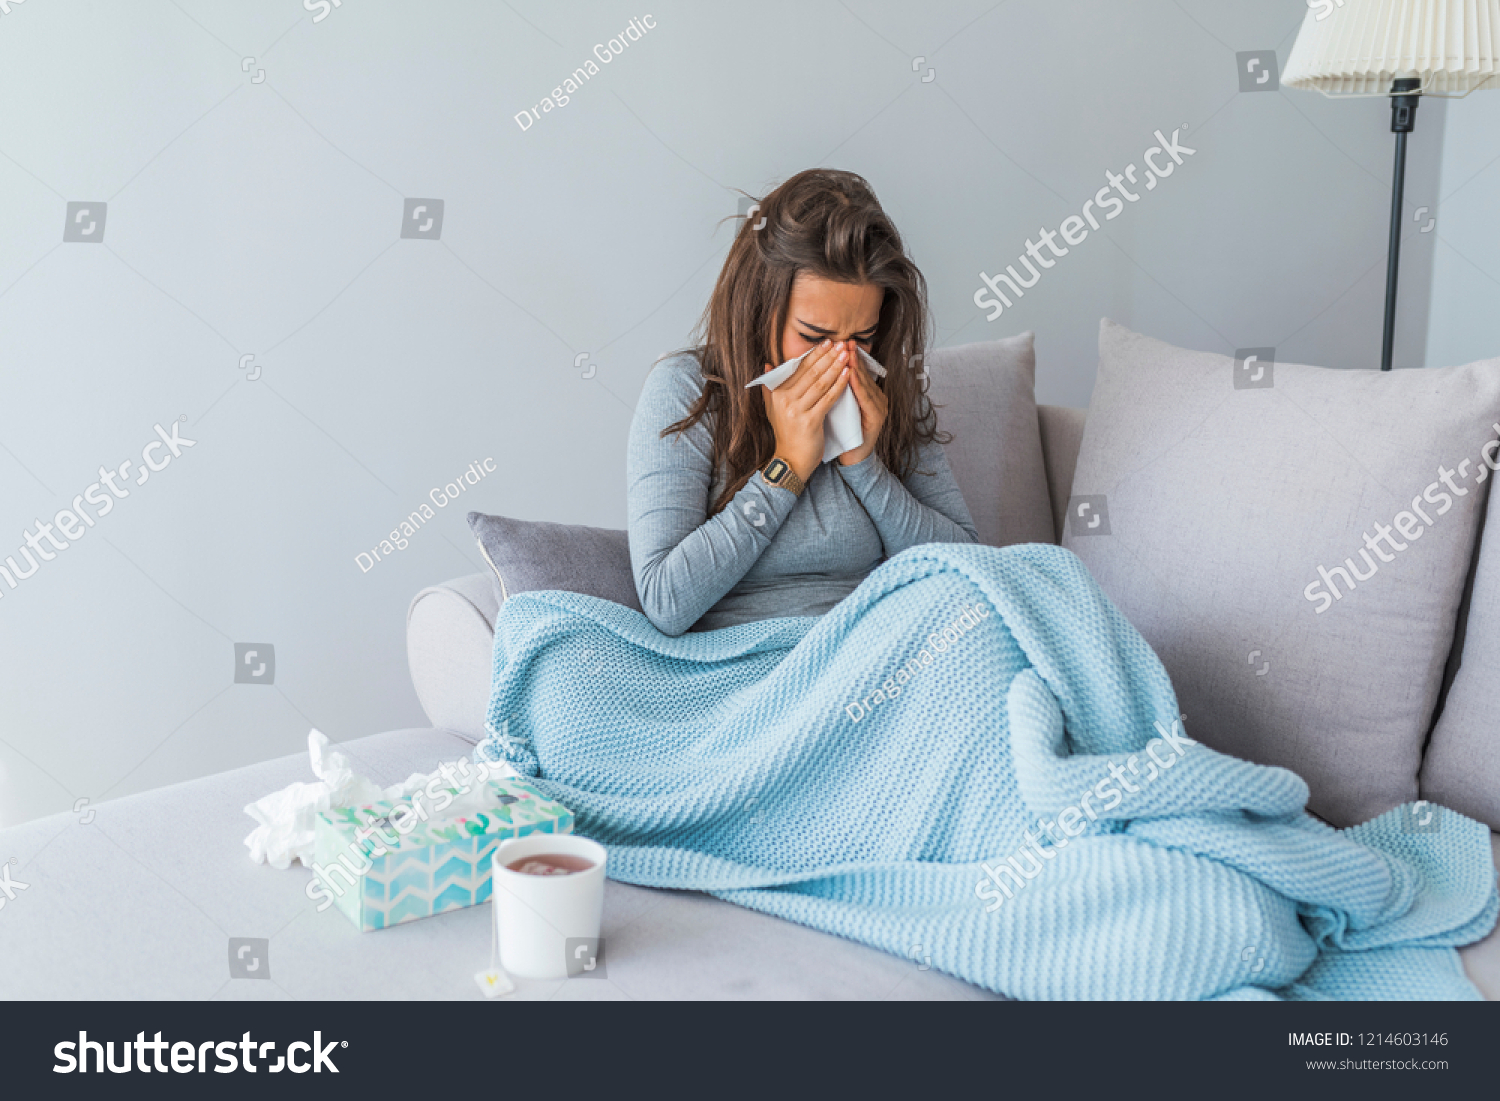 Cold And Flu. Portrait Of Ill Woman Caught Cold, Feeling Sick And Sneezing In Paper Wipe. Closeup Of Beautiful Unhealthy Girl Covered In Blanket Wiping Nose. Healthcare Concept. High Resolution #1214603146